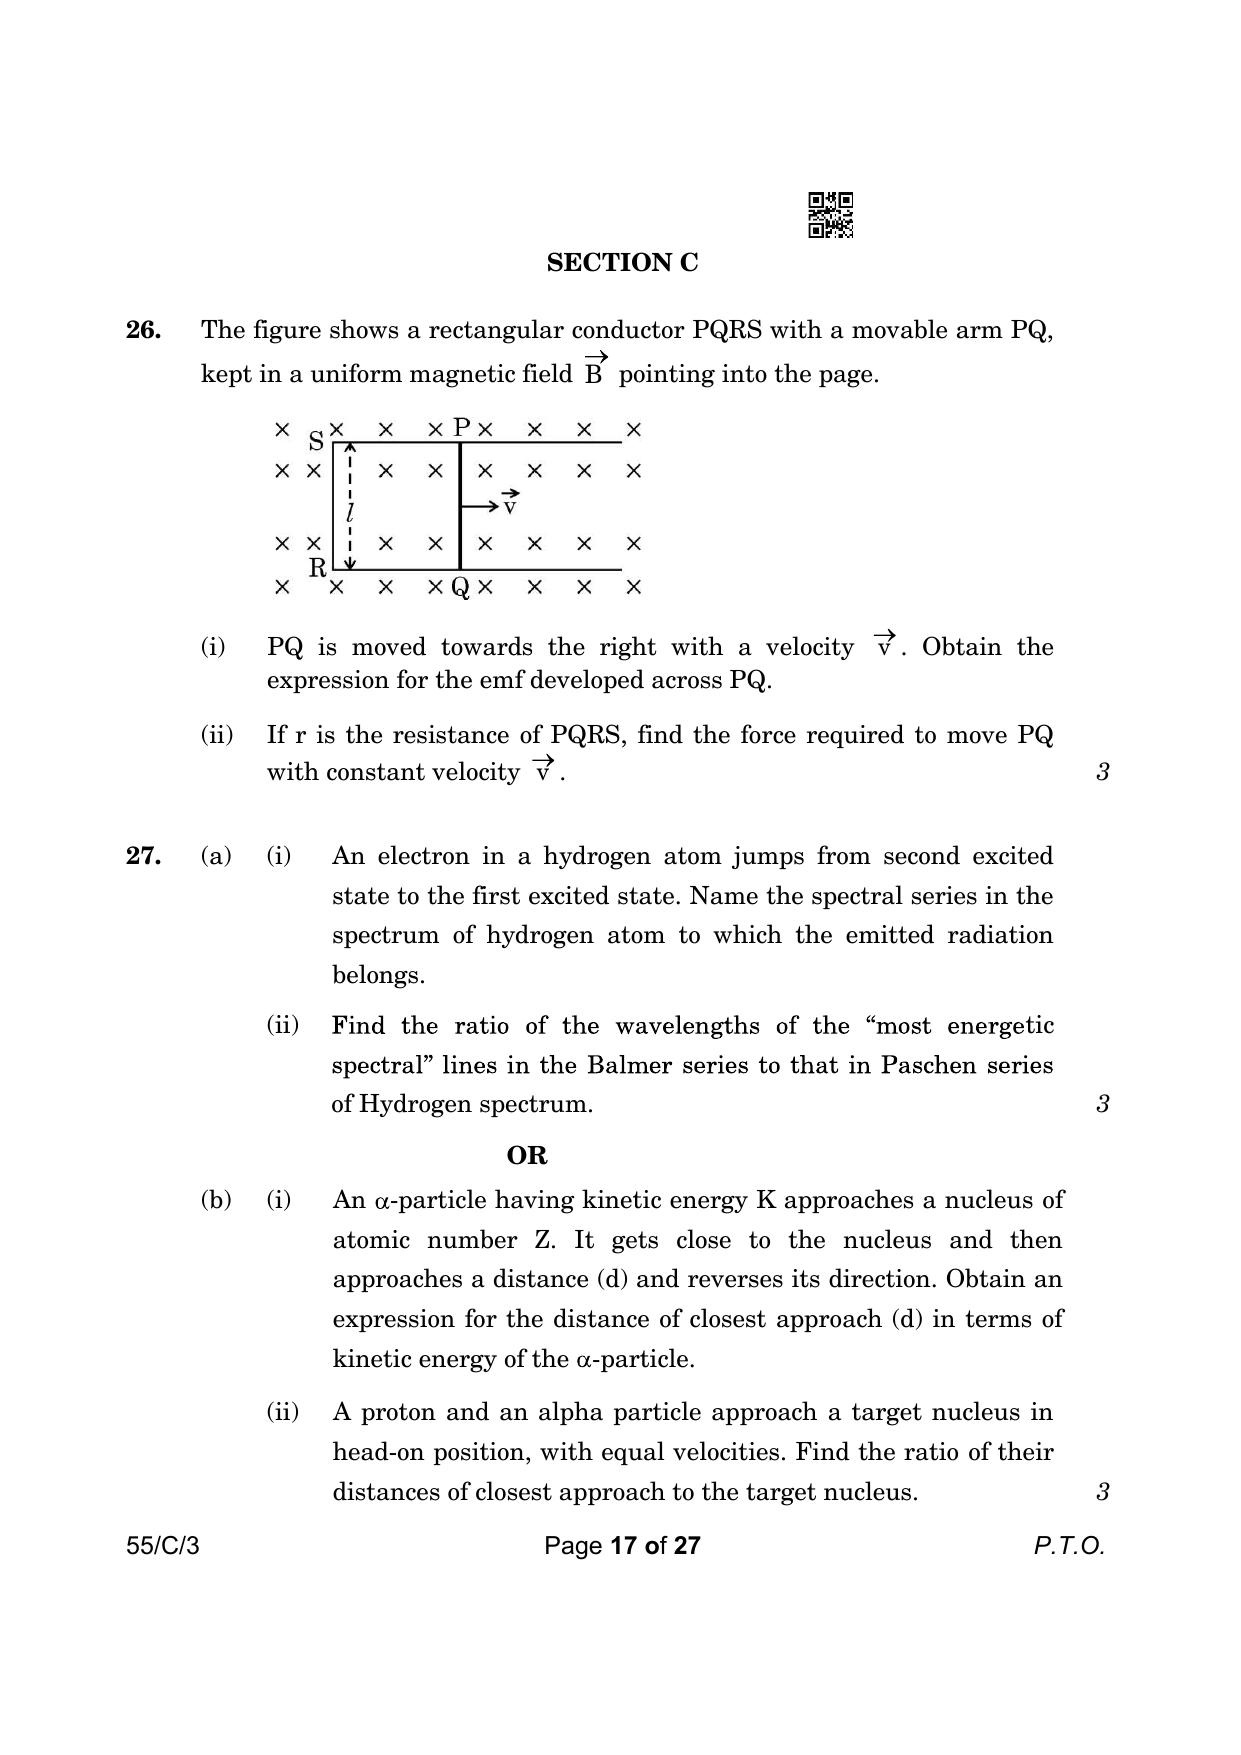 CBSE Class 12 55-3 Physics 2023 (Compartment) Question Paper - Page 17